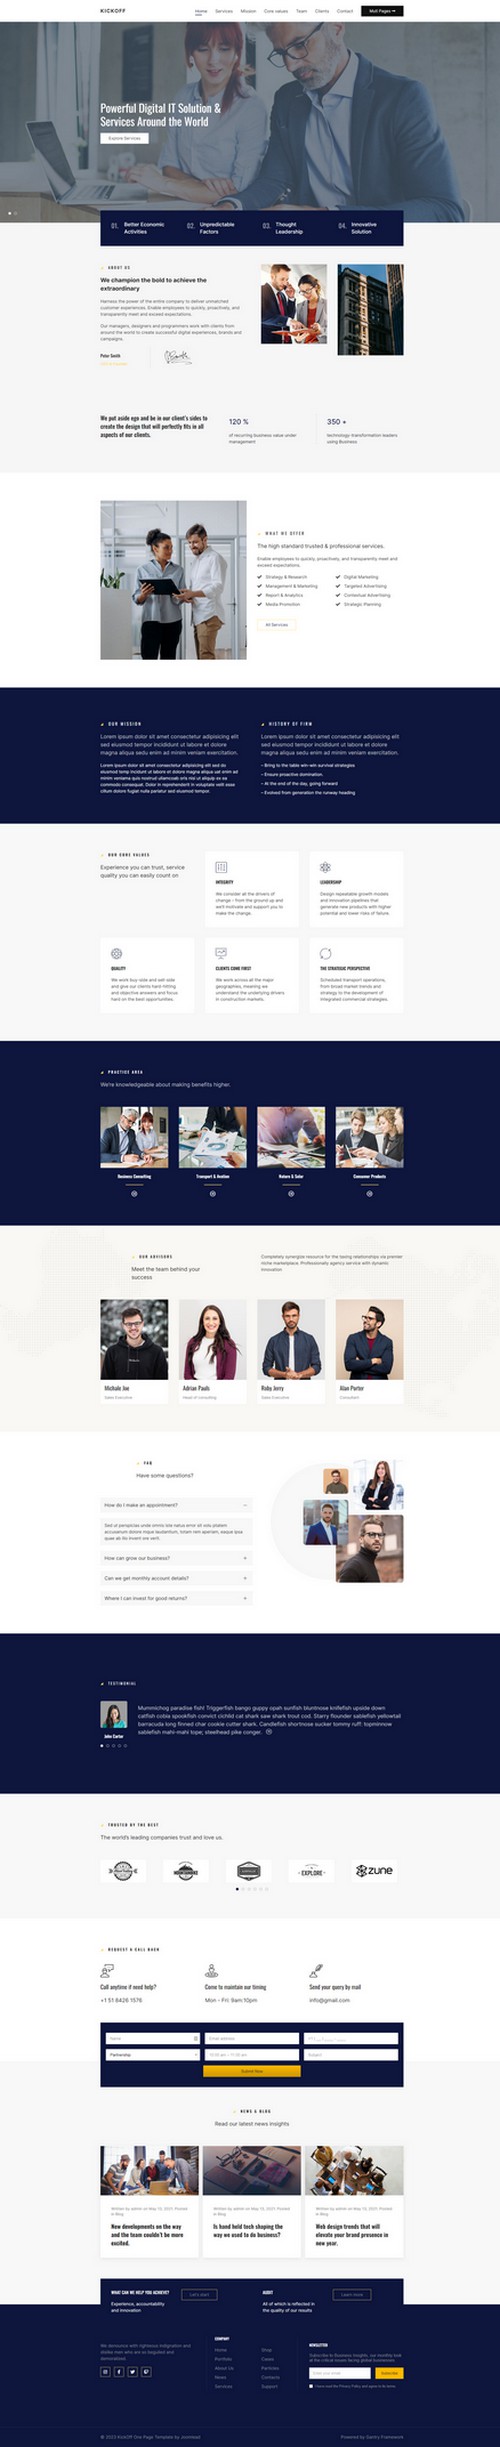 KickOff - Product Landing Services Joomla 4 Template